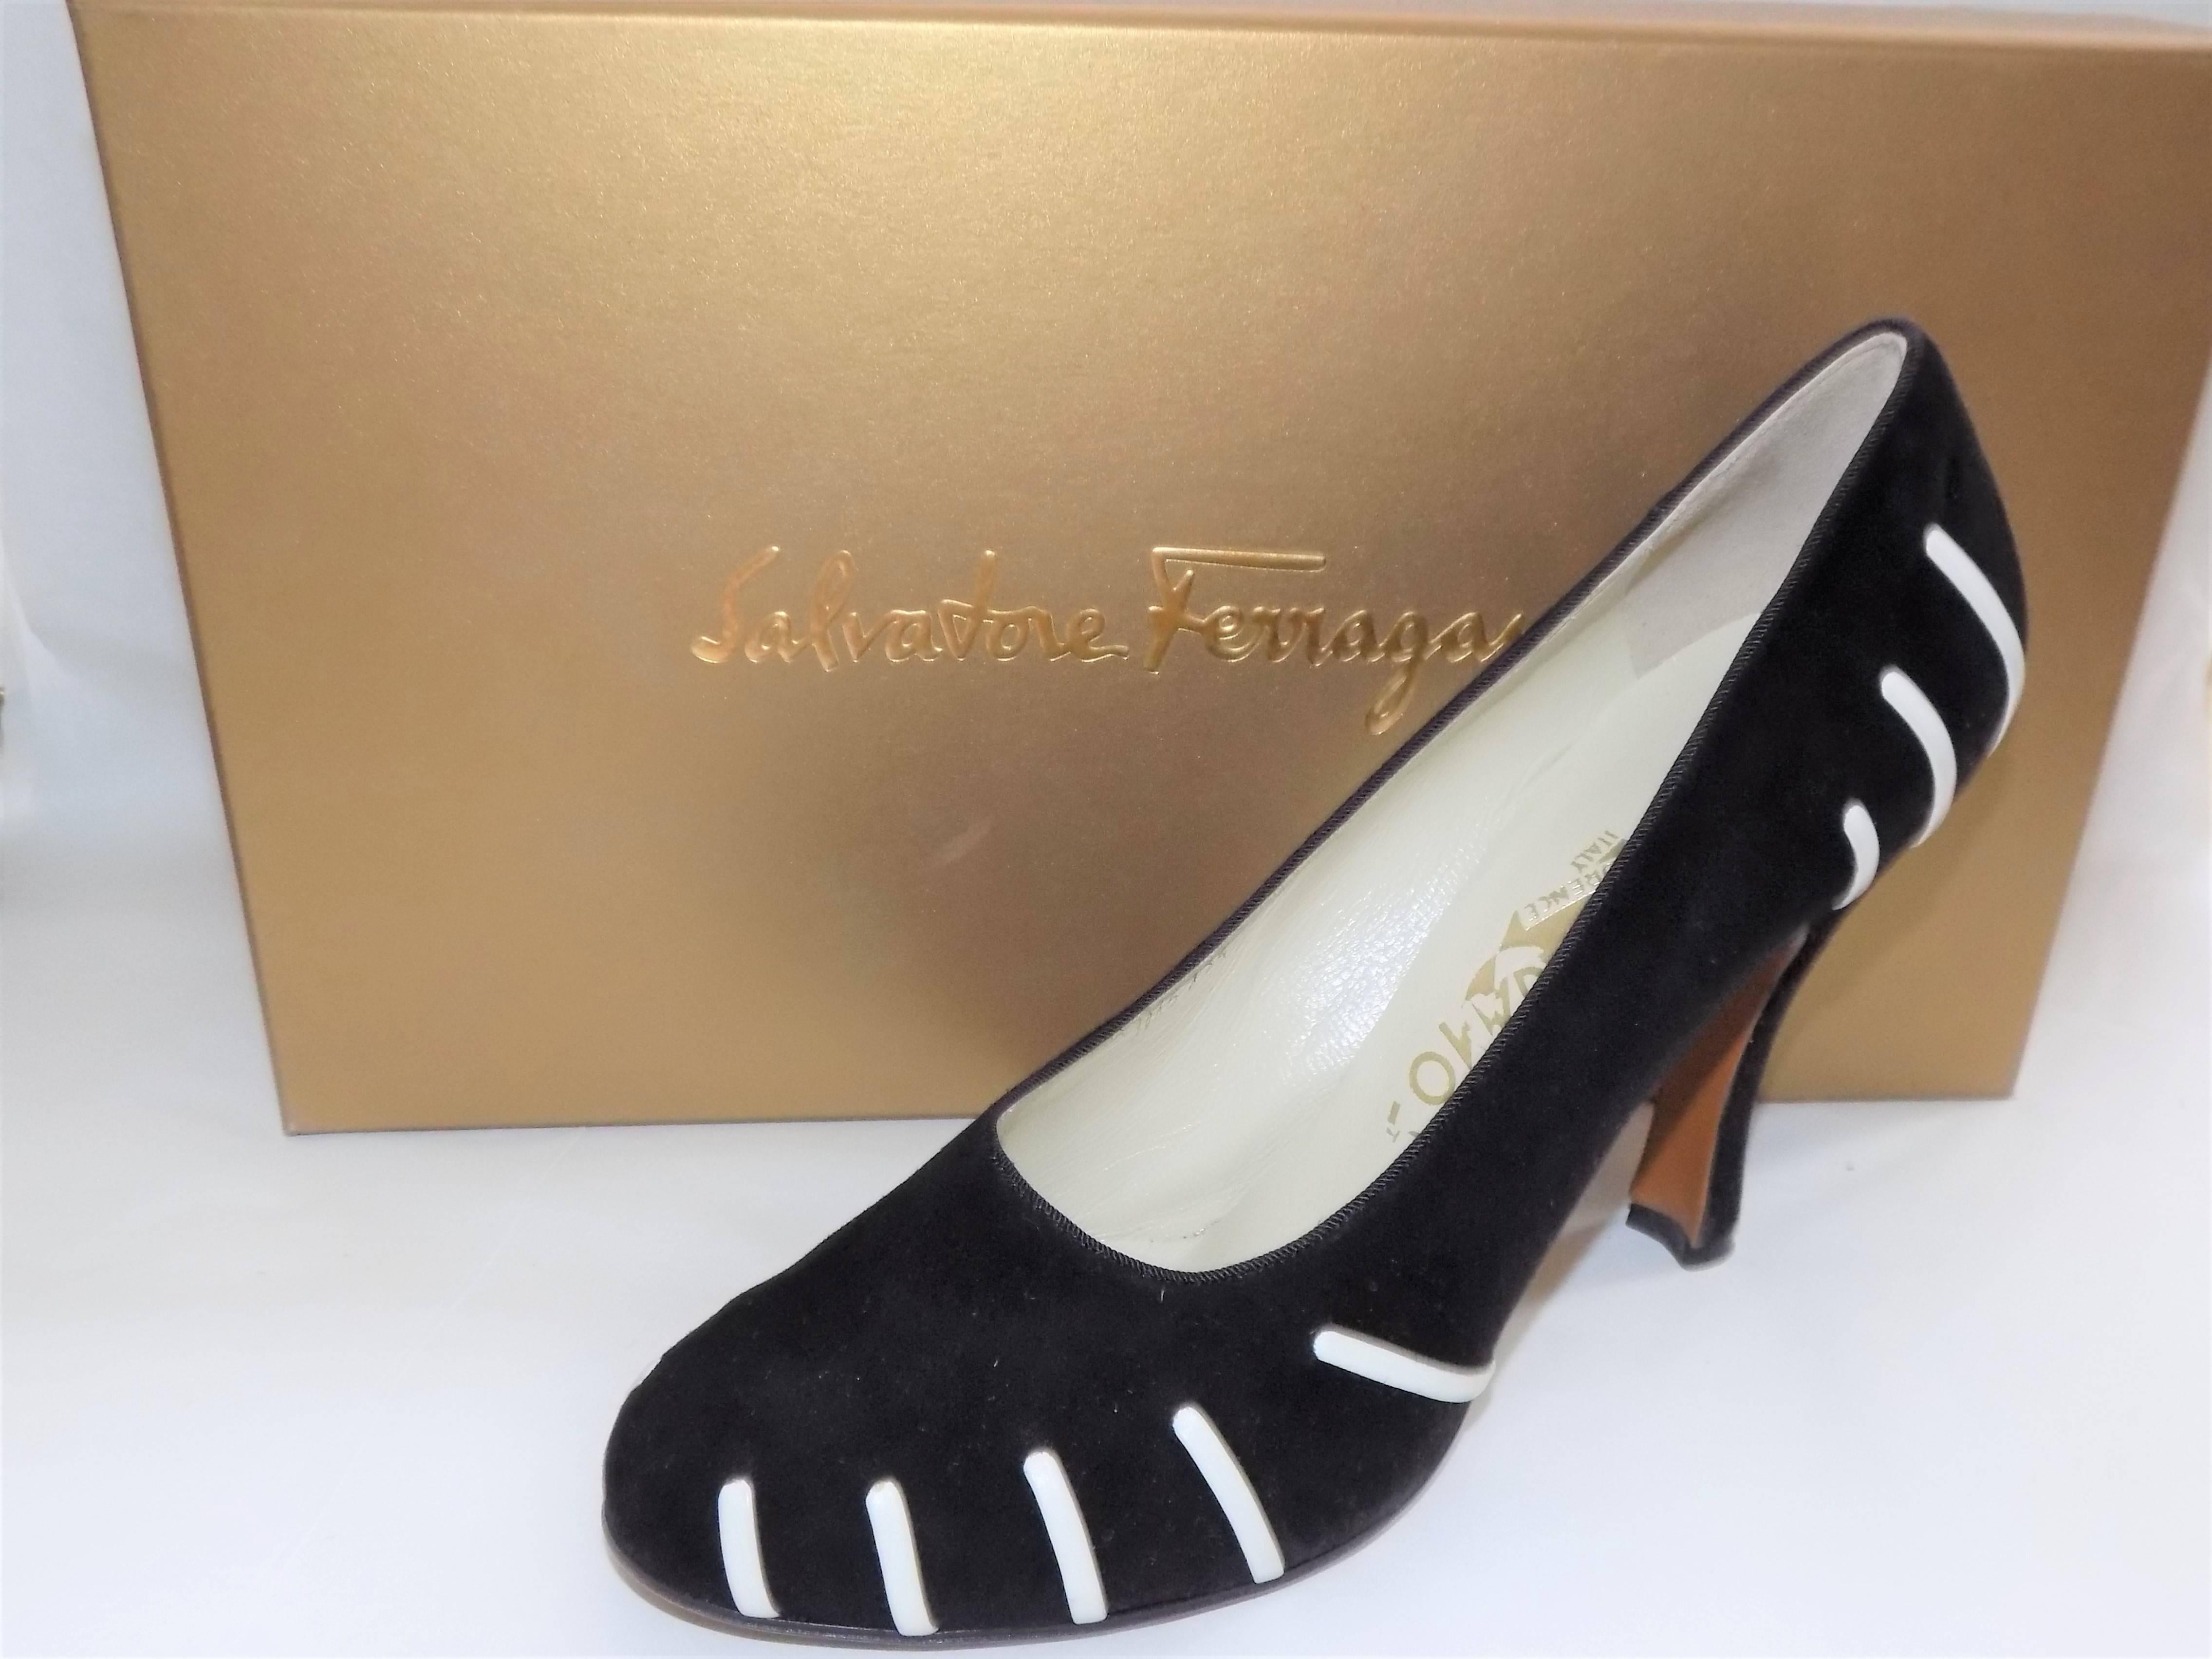 Beautiful all hand made Salvatore Ferragamo Museum Limited Edition Rare shoes. Black suede with white leather   details. Made only 150 pairs . This is Number 64.   .Luxurios gold   satin sleeper bags and box. Made in Florence, Italy. Heel 3.5